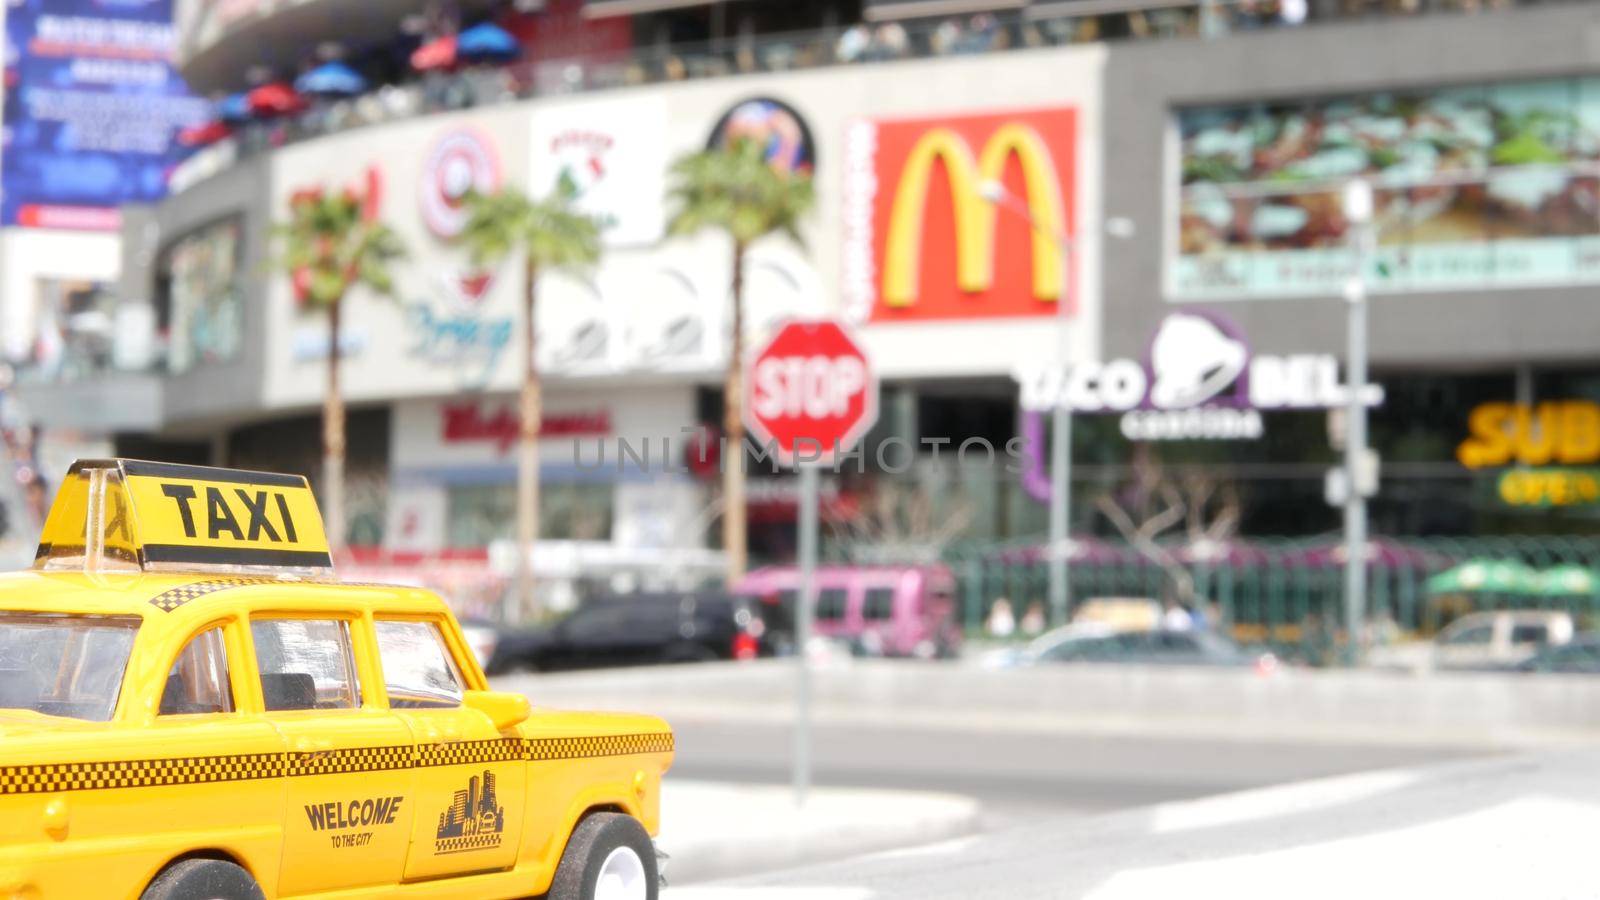 LAS VEGAS, NEVADA USA - 7 MAR 2020: Yellow vacant mini taxi cab close up on Harmon avenue corner. Small retro car model. Little iconic auto toy as symbol of transport against american shopping mall by DogoraSun